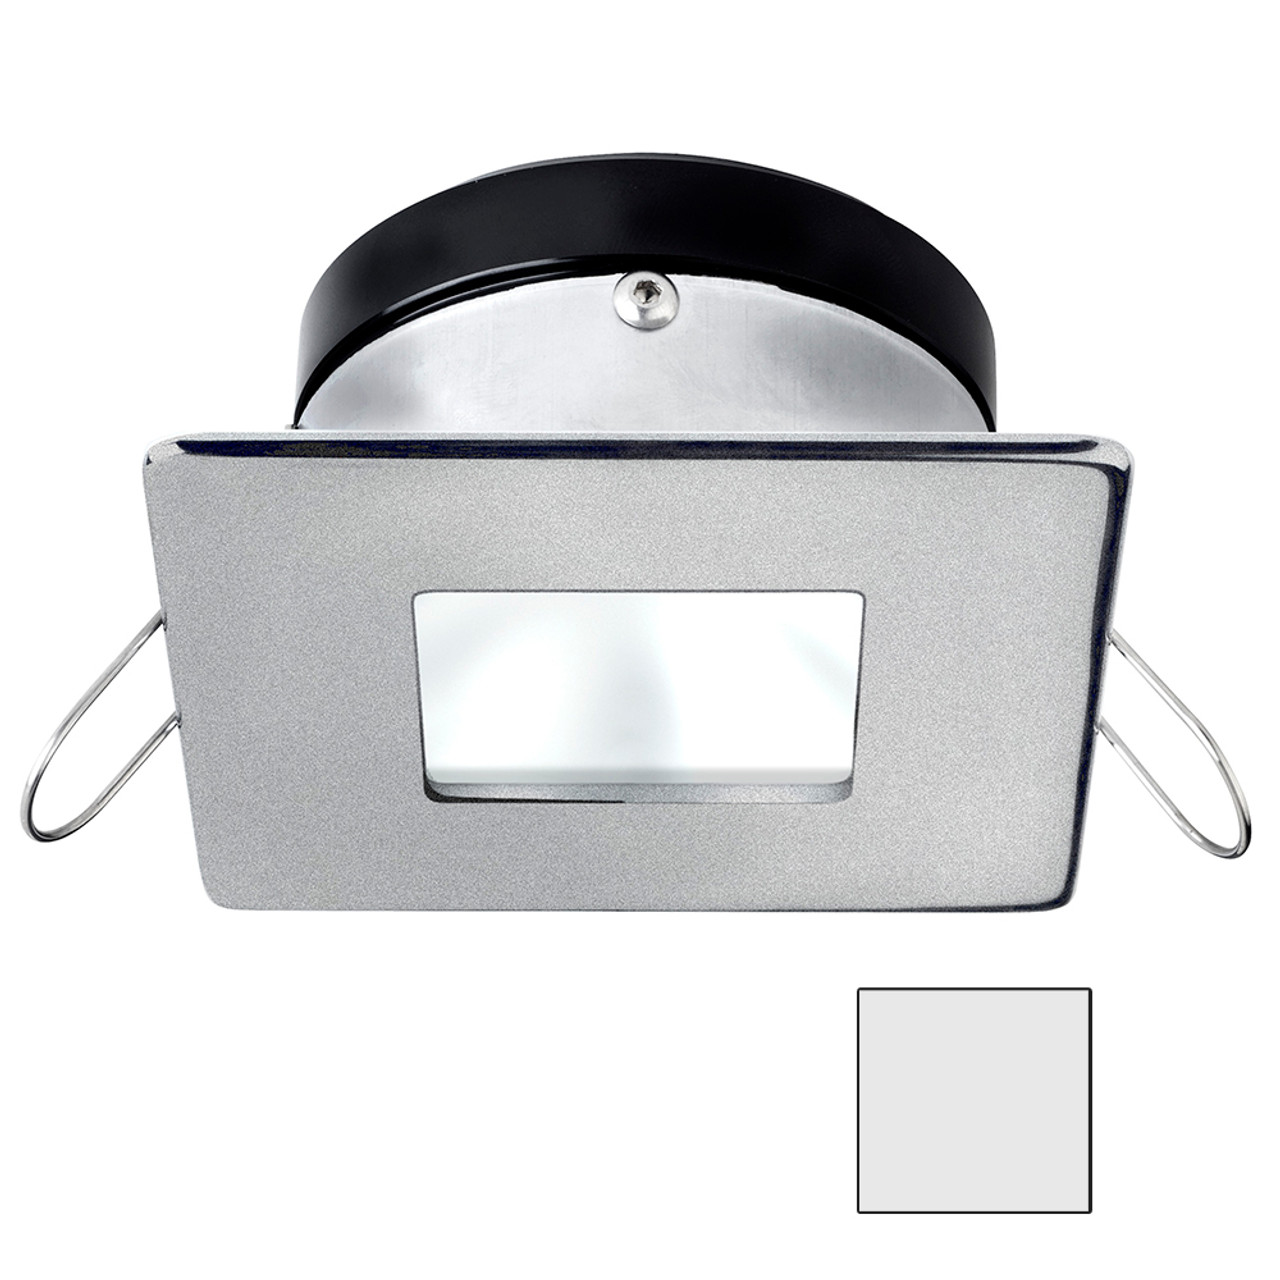 i2Systems - Apeiron A1110Z - 4.5W, Spring Mount, Square/Square, Cool White, Brushed Nickel Finish - Apollo Lighting